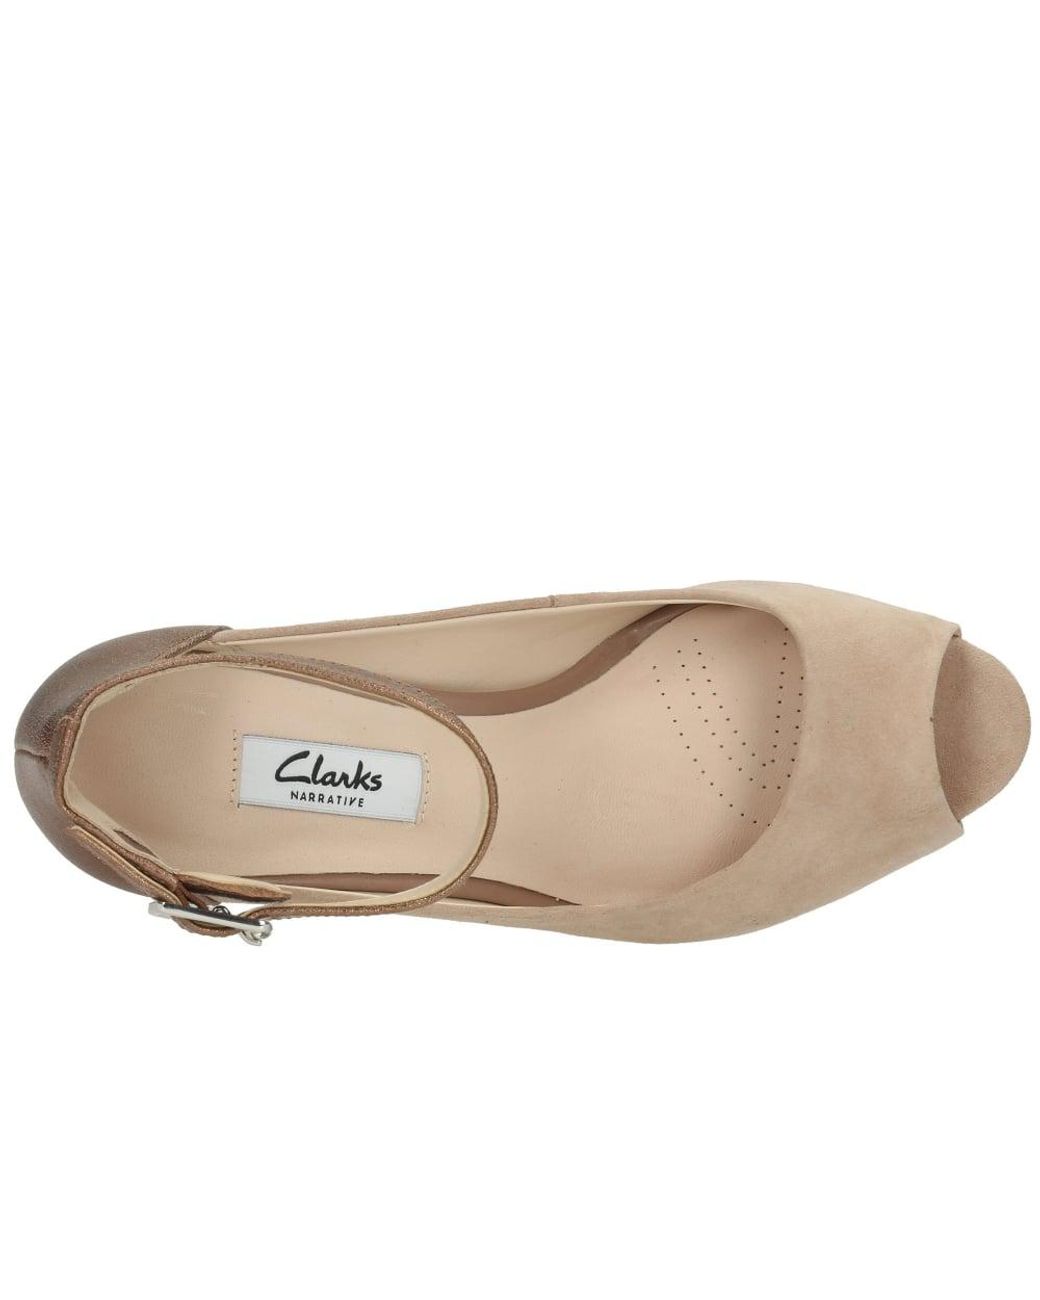 Clarks Suede Kendra Ella Womens Shoes in Natural | Lyst Canada